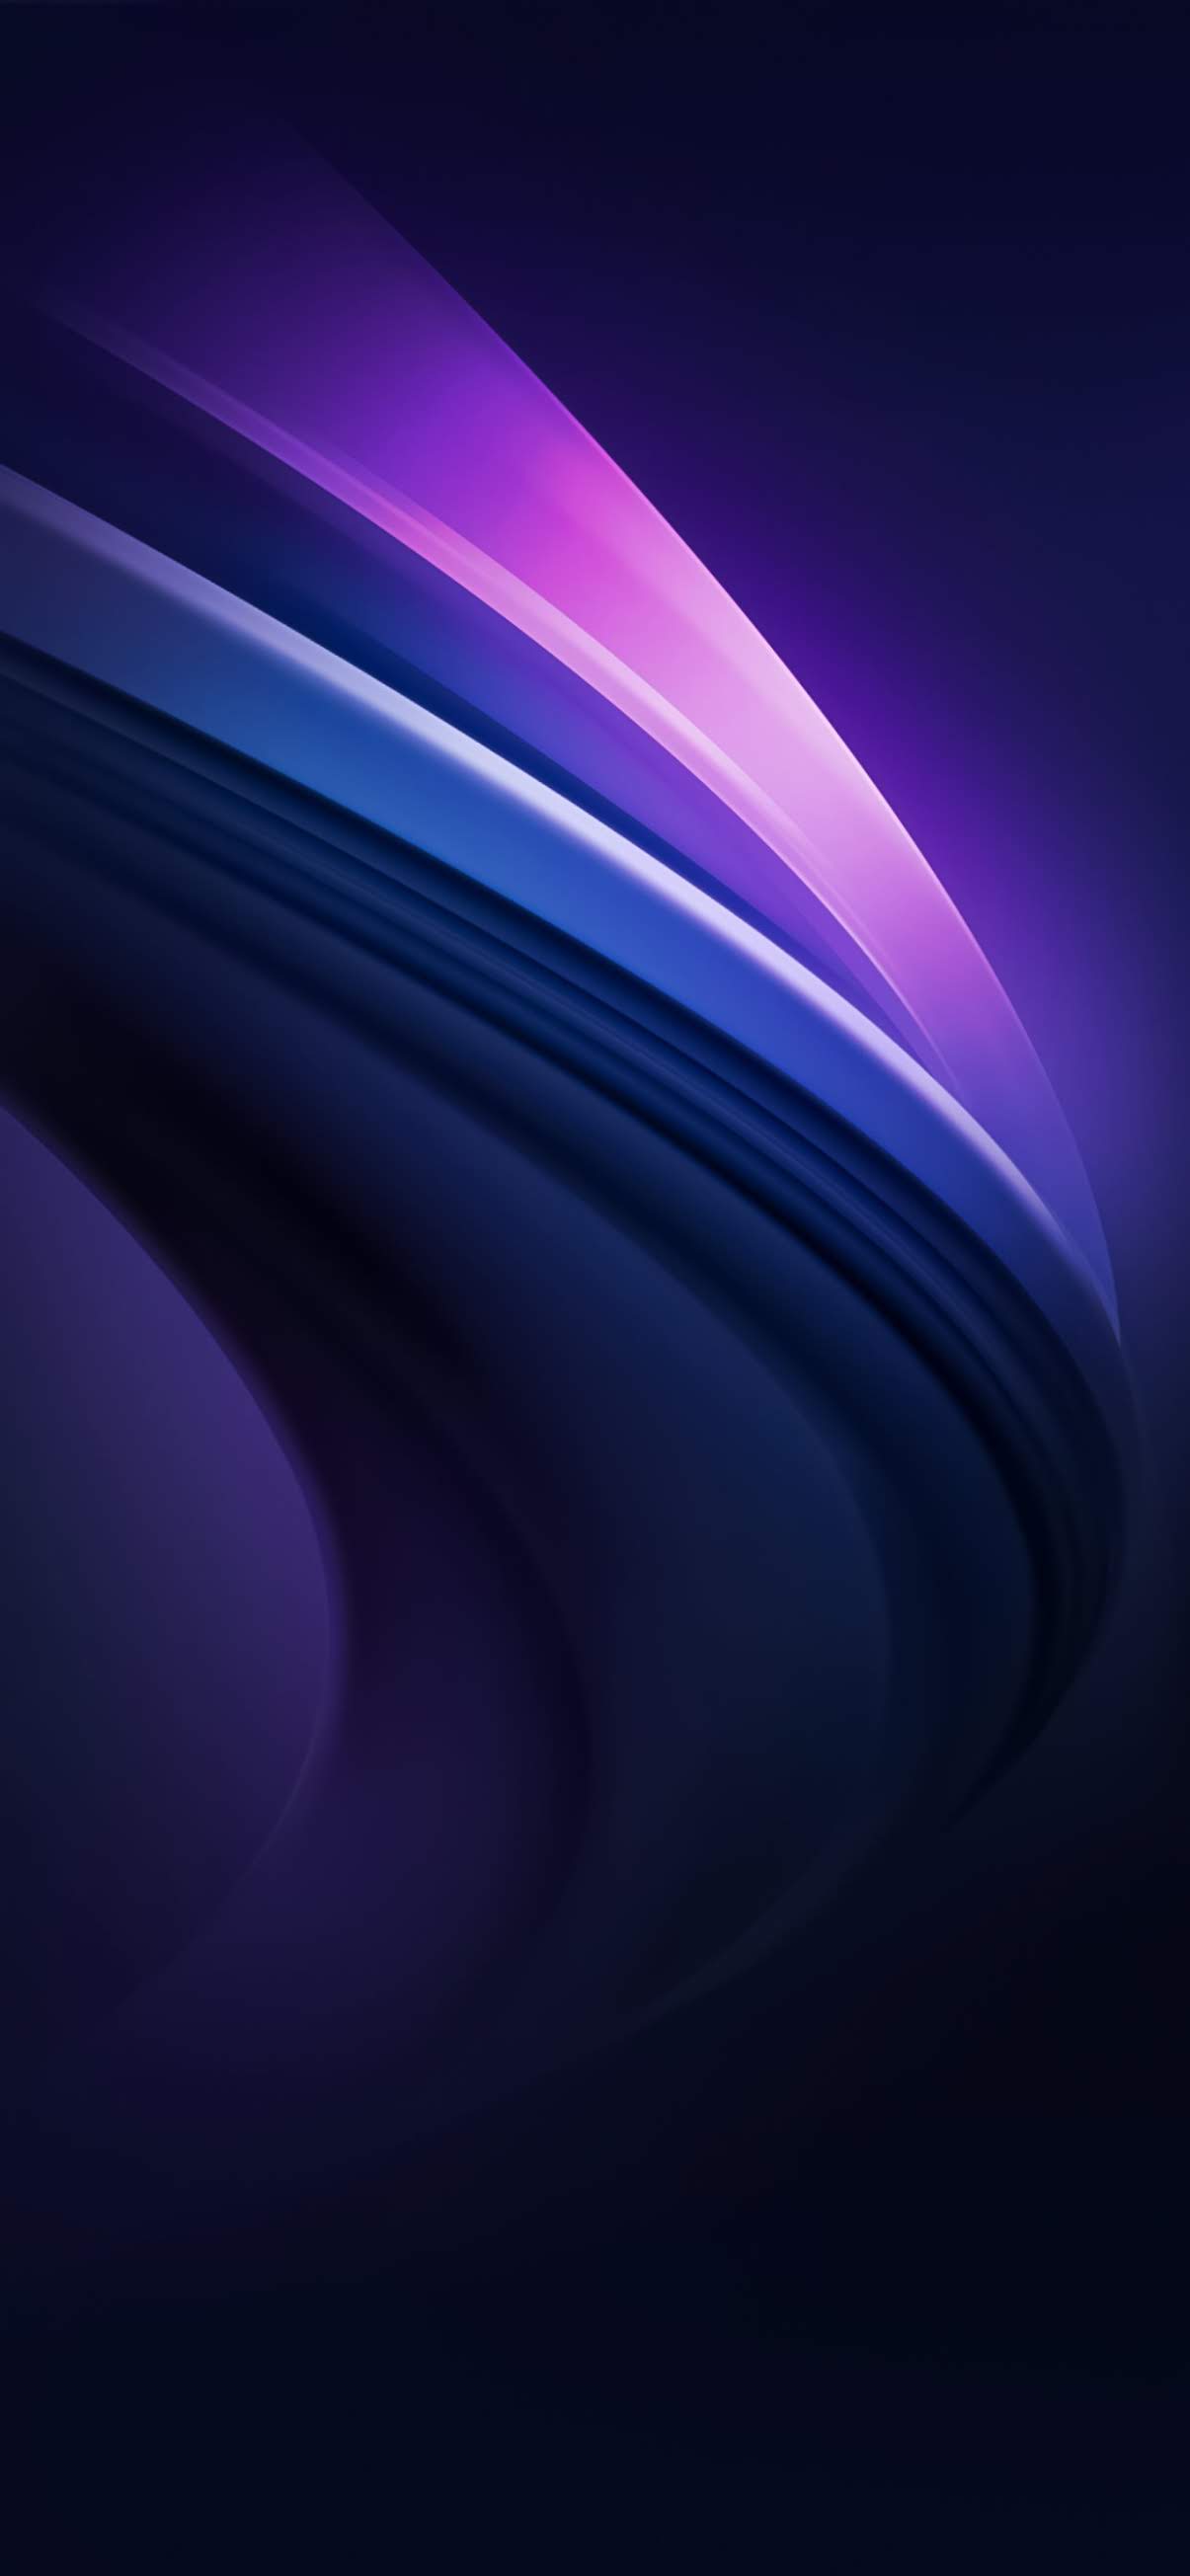 Wallpapers Iphone Xs Max Pack 1